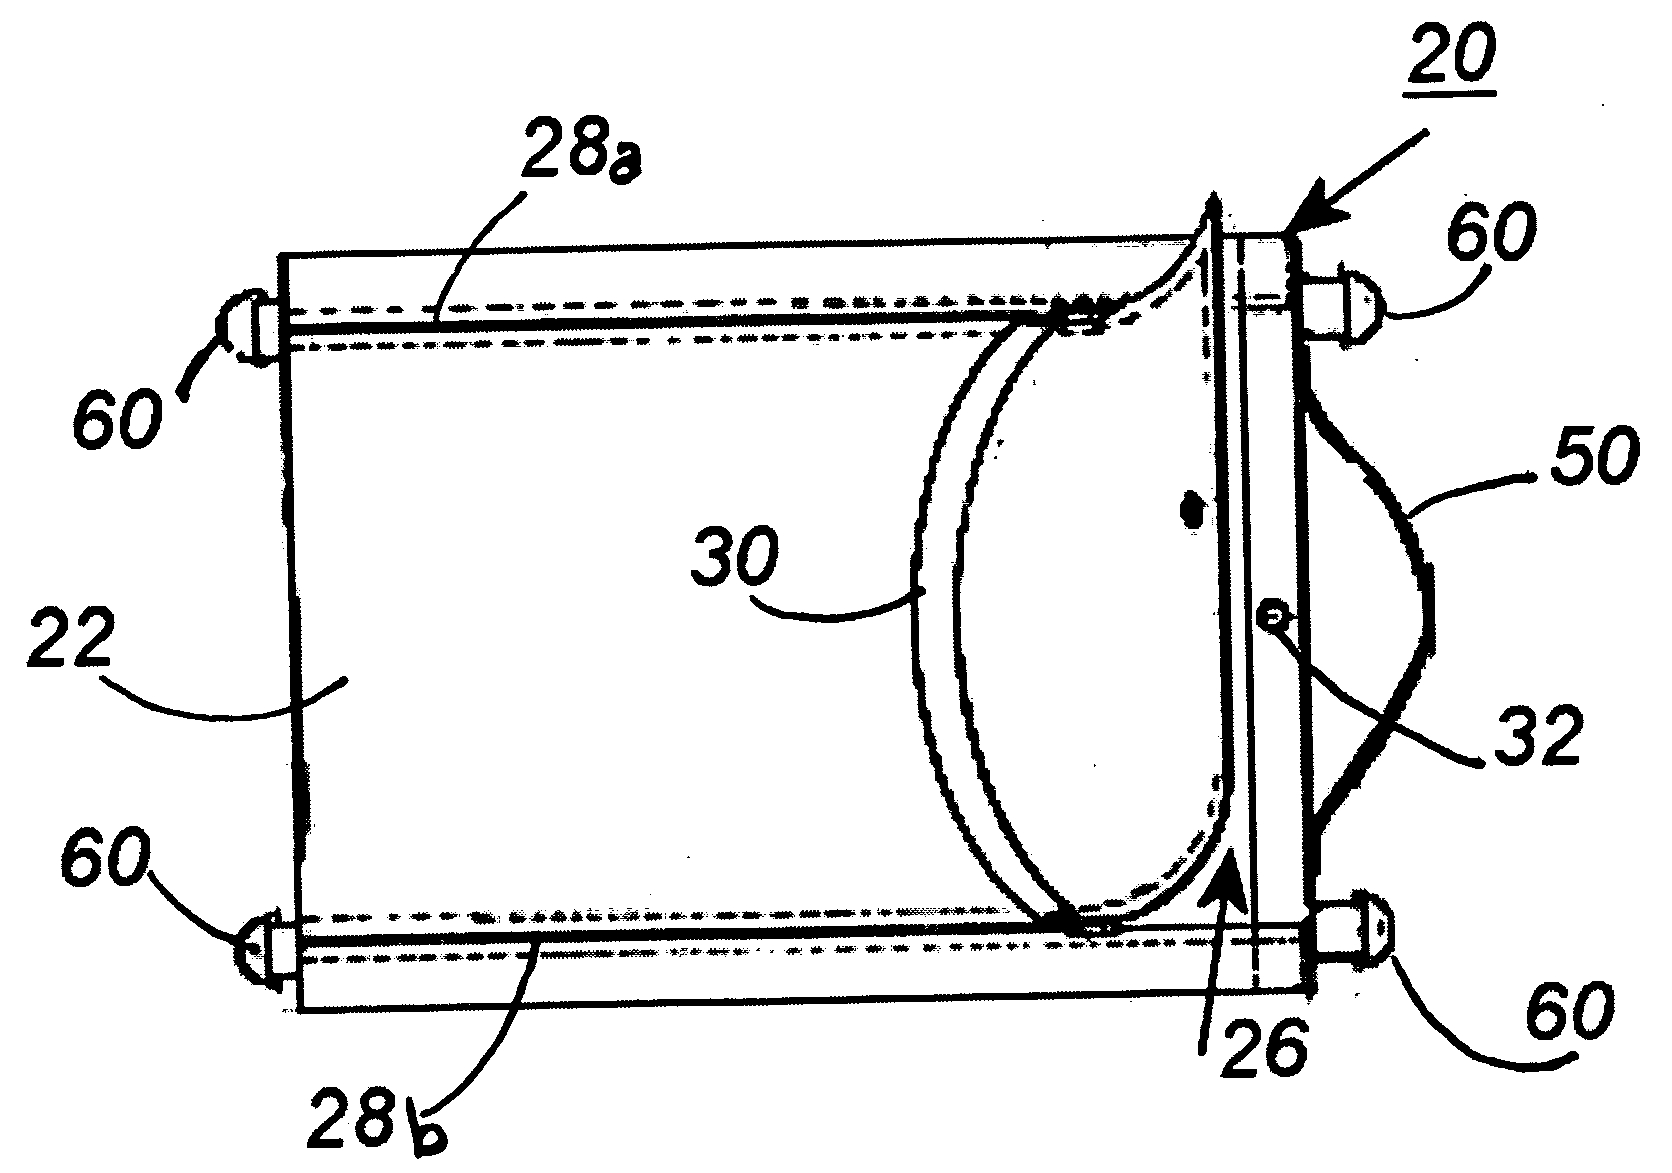 Portable photographic printing method and apparatus